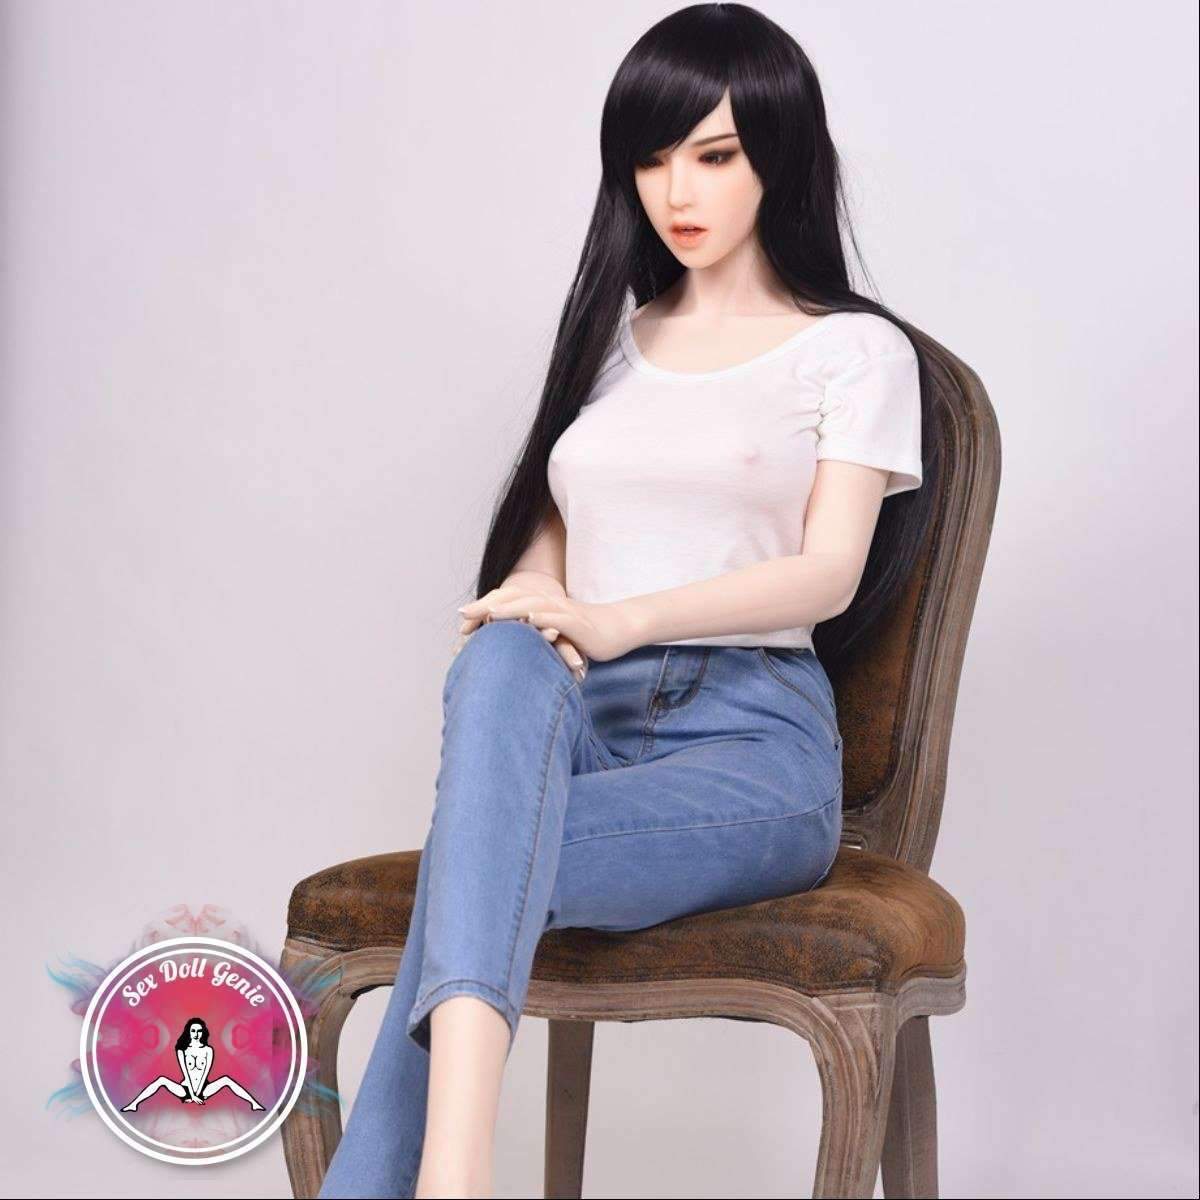 DS Doll - 163Plus - Kayla Head - Type 2 D Cup Silicone Doll-4